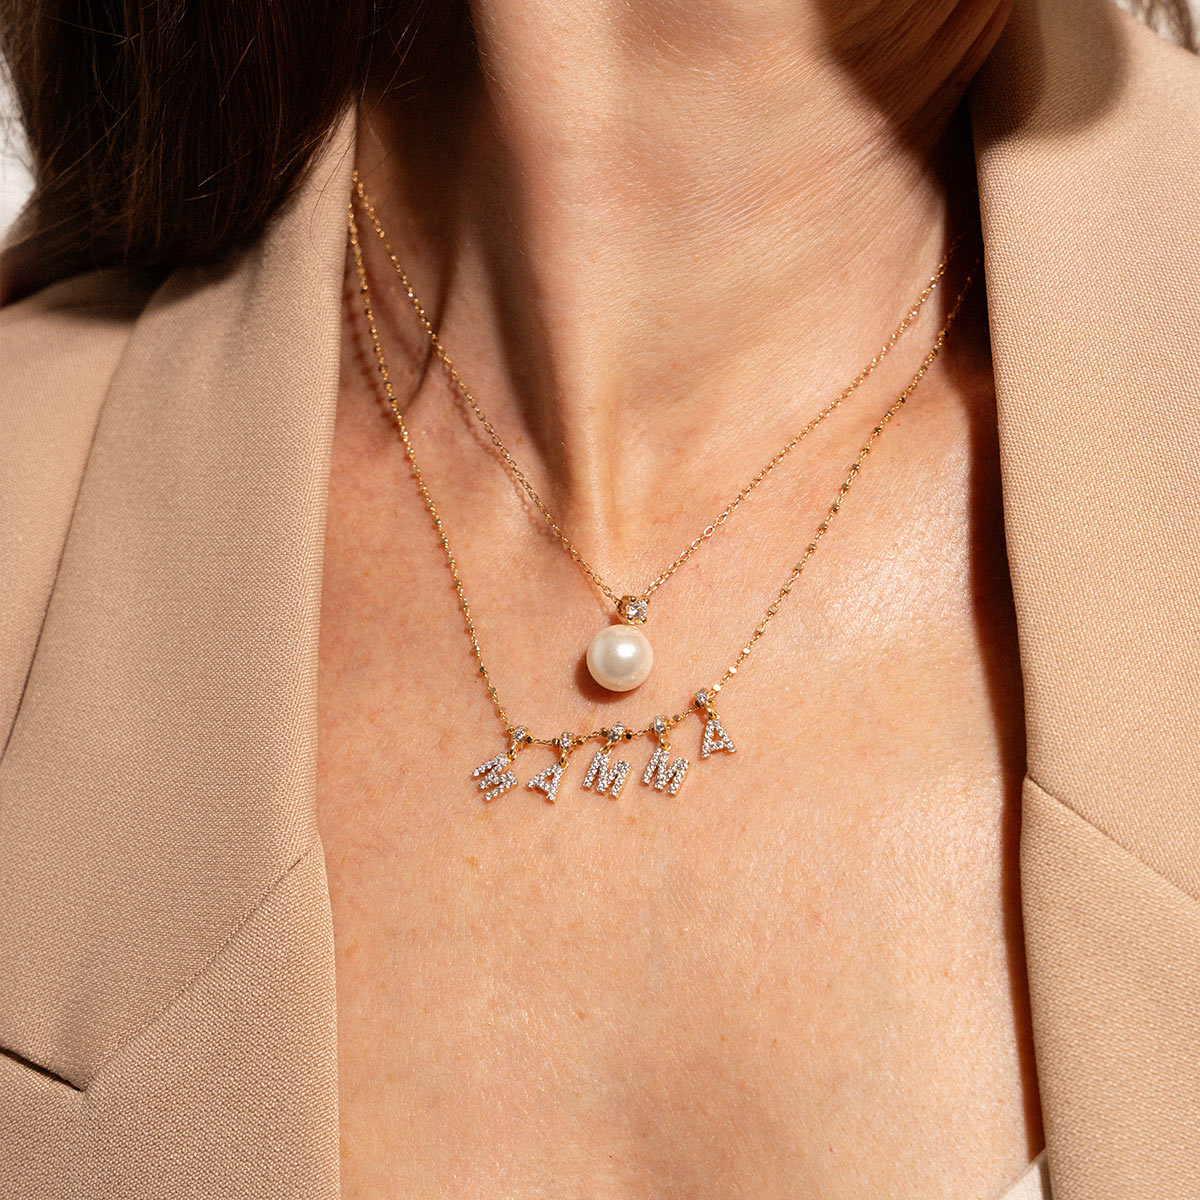 Customizable necklace with dangling letters and zircons